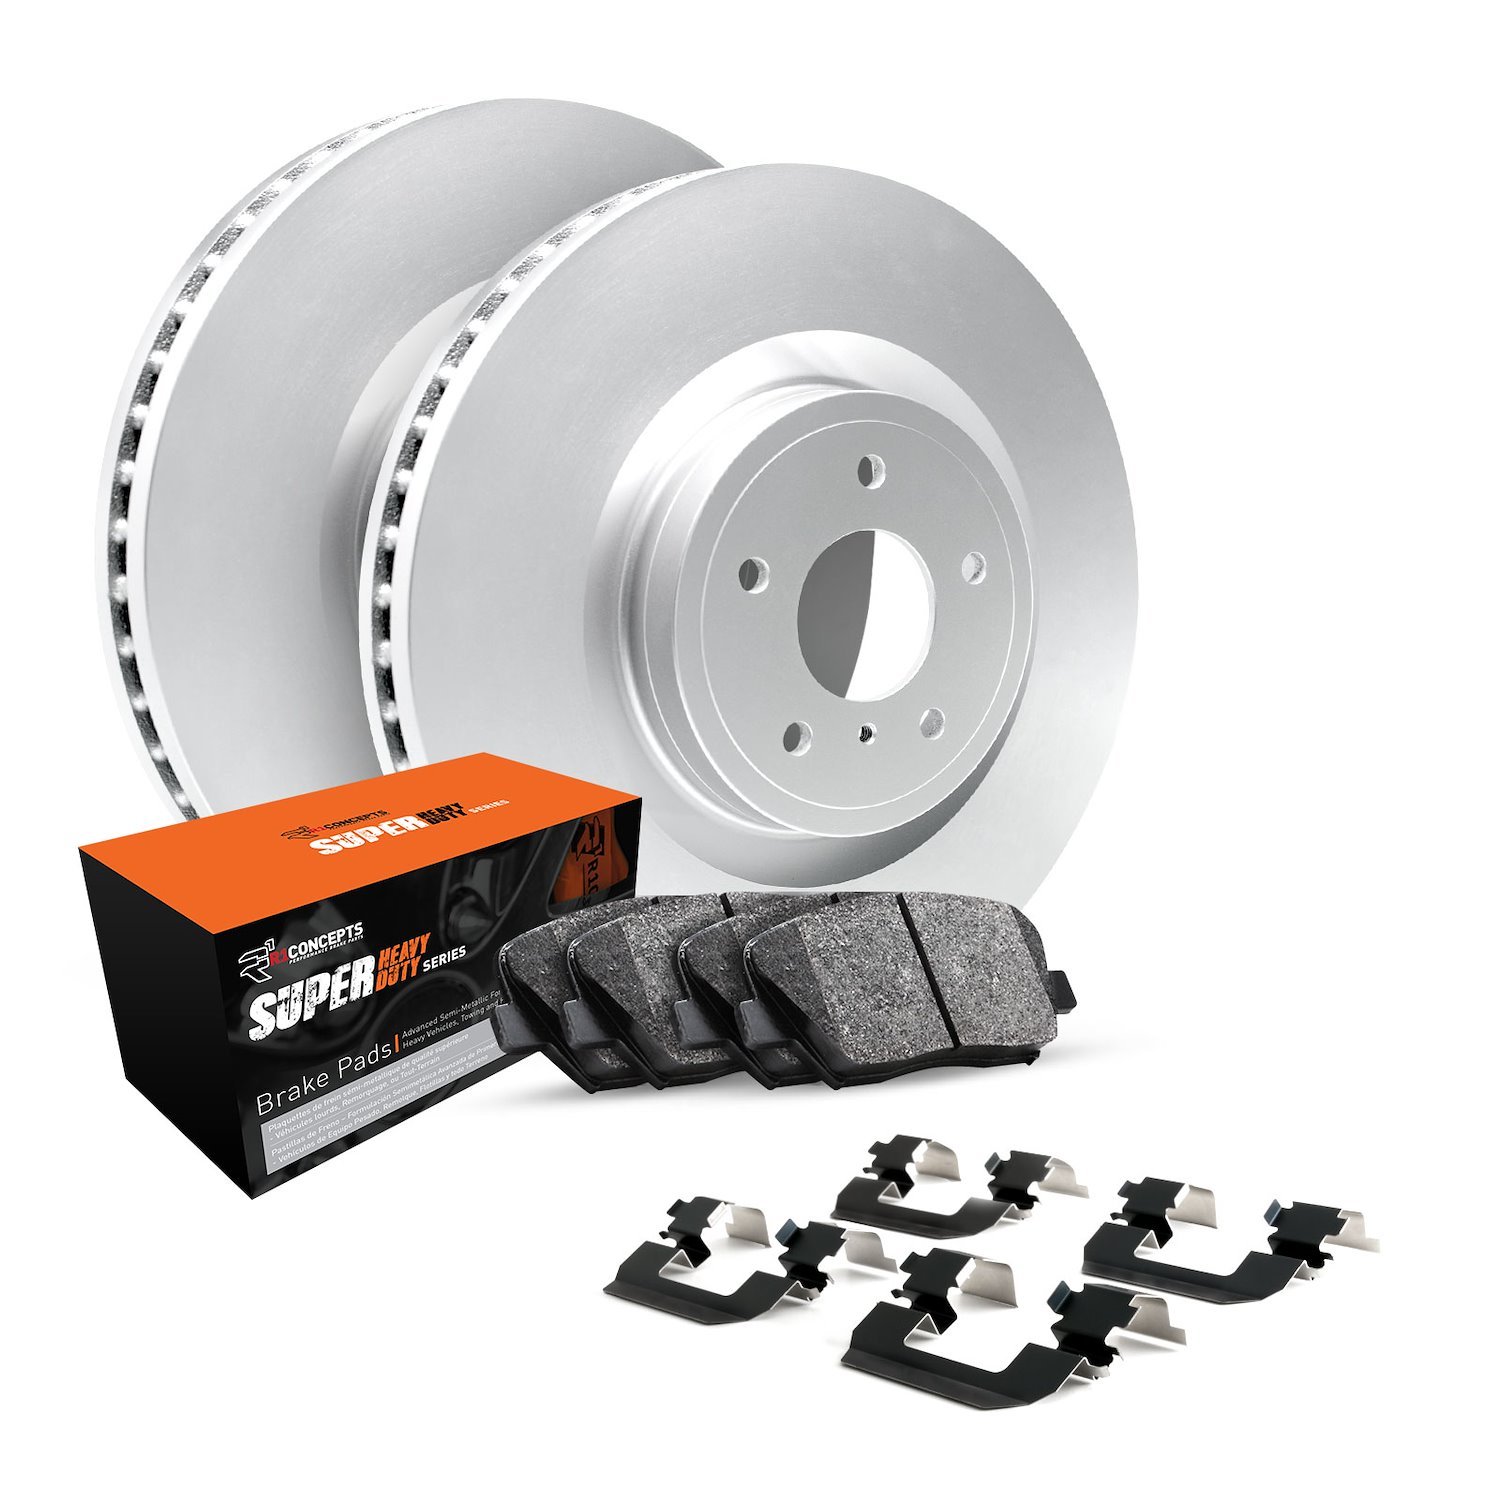 GEO-Carbon Brake Rotor Set w/Super-Duty Pads & Hardware, Fits Select Infiniti/Nissan, Position: Front